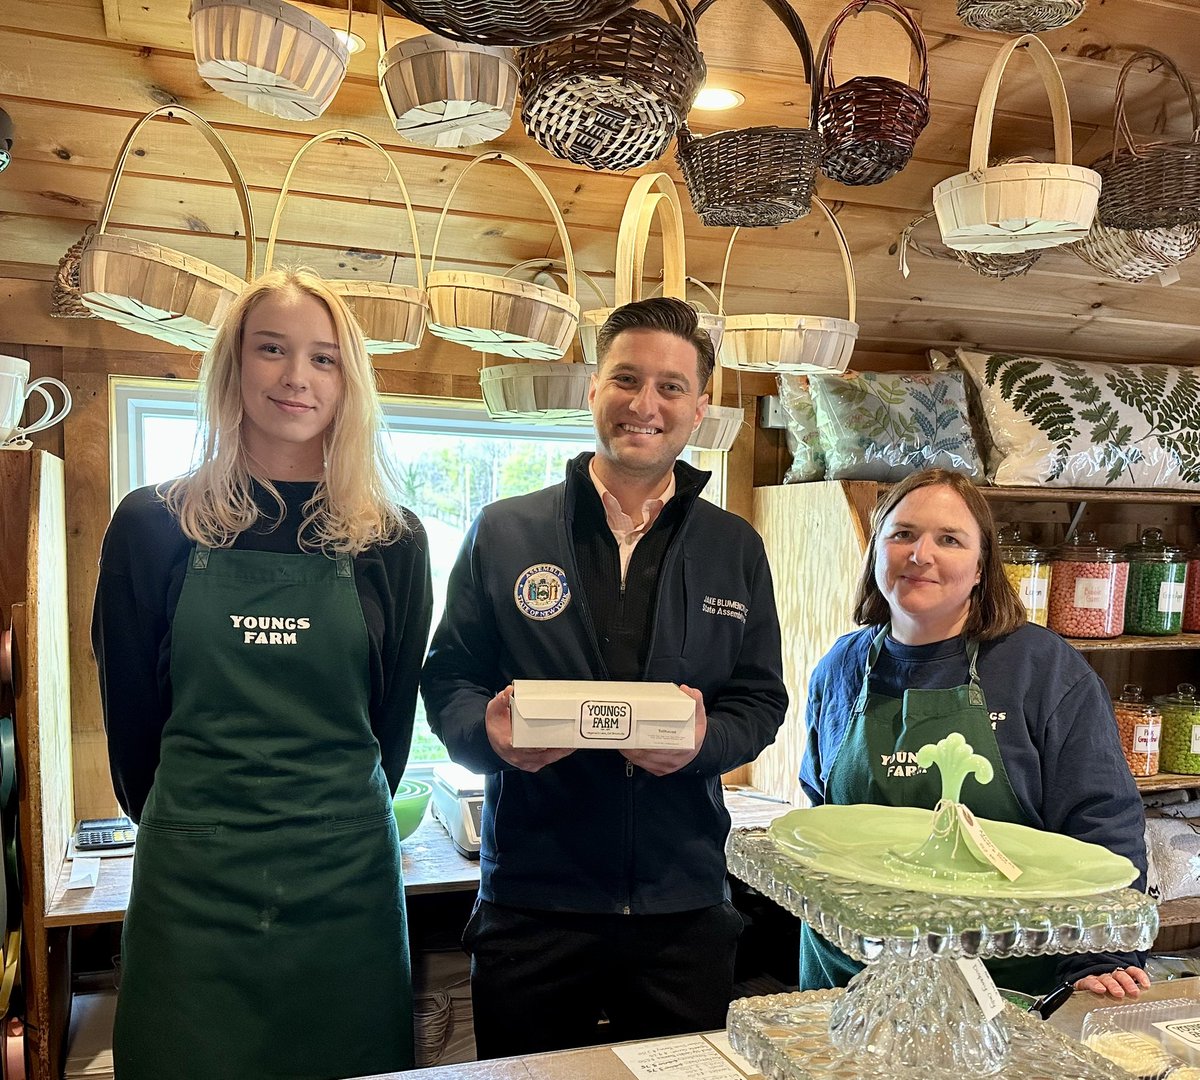 It’s #SmallBusinessSaturday and I’m excited to support Youngs Farms, one of my favorite working farms in Nassau County and located right in beautiful #AD15 in Old Brookville! While you're there, be sure to try their amazing [and my favorite] Tollhouse Pie! 🚜🥧 @LIFarmBureau